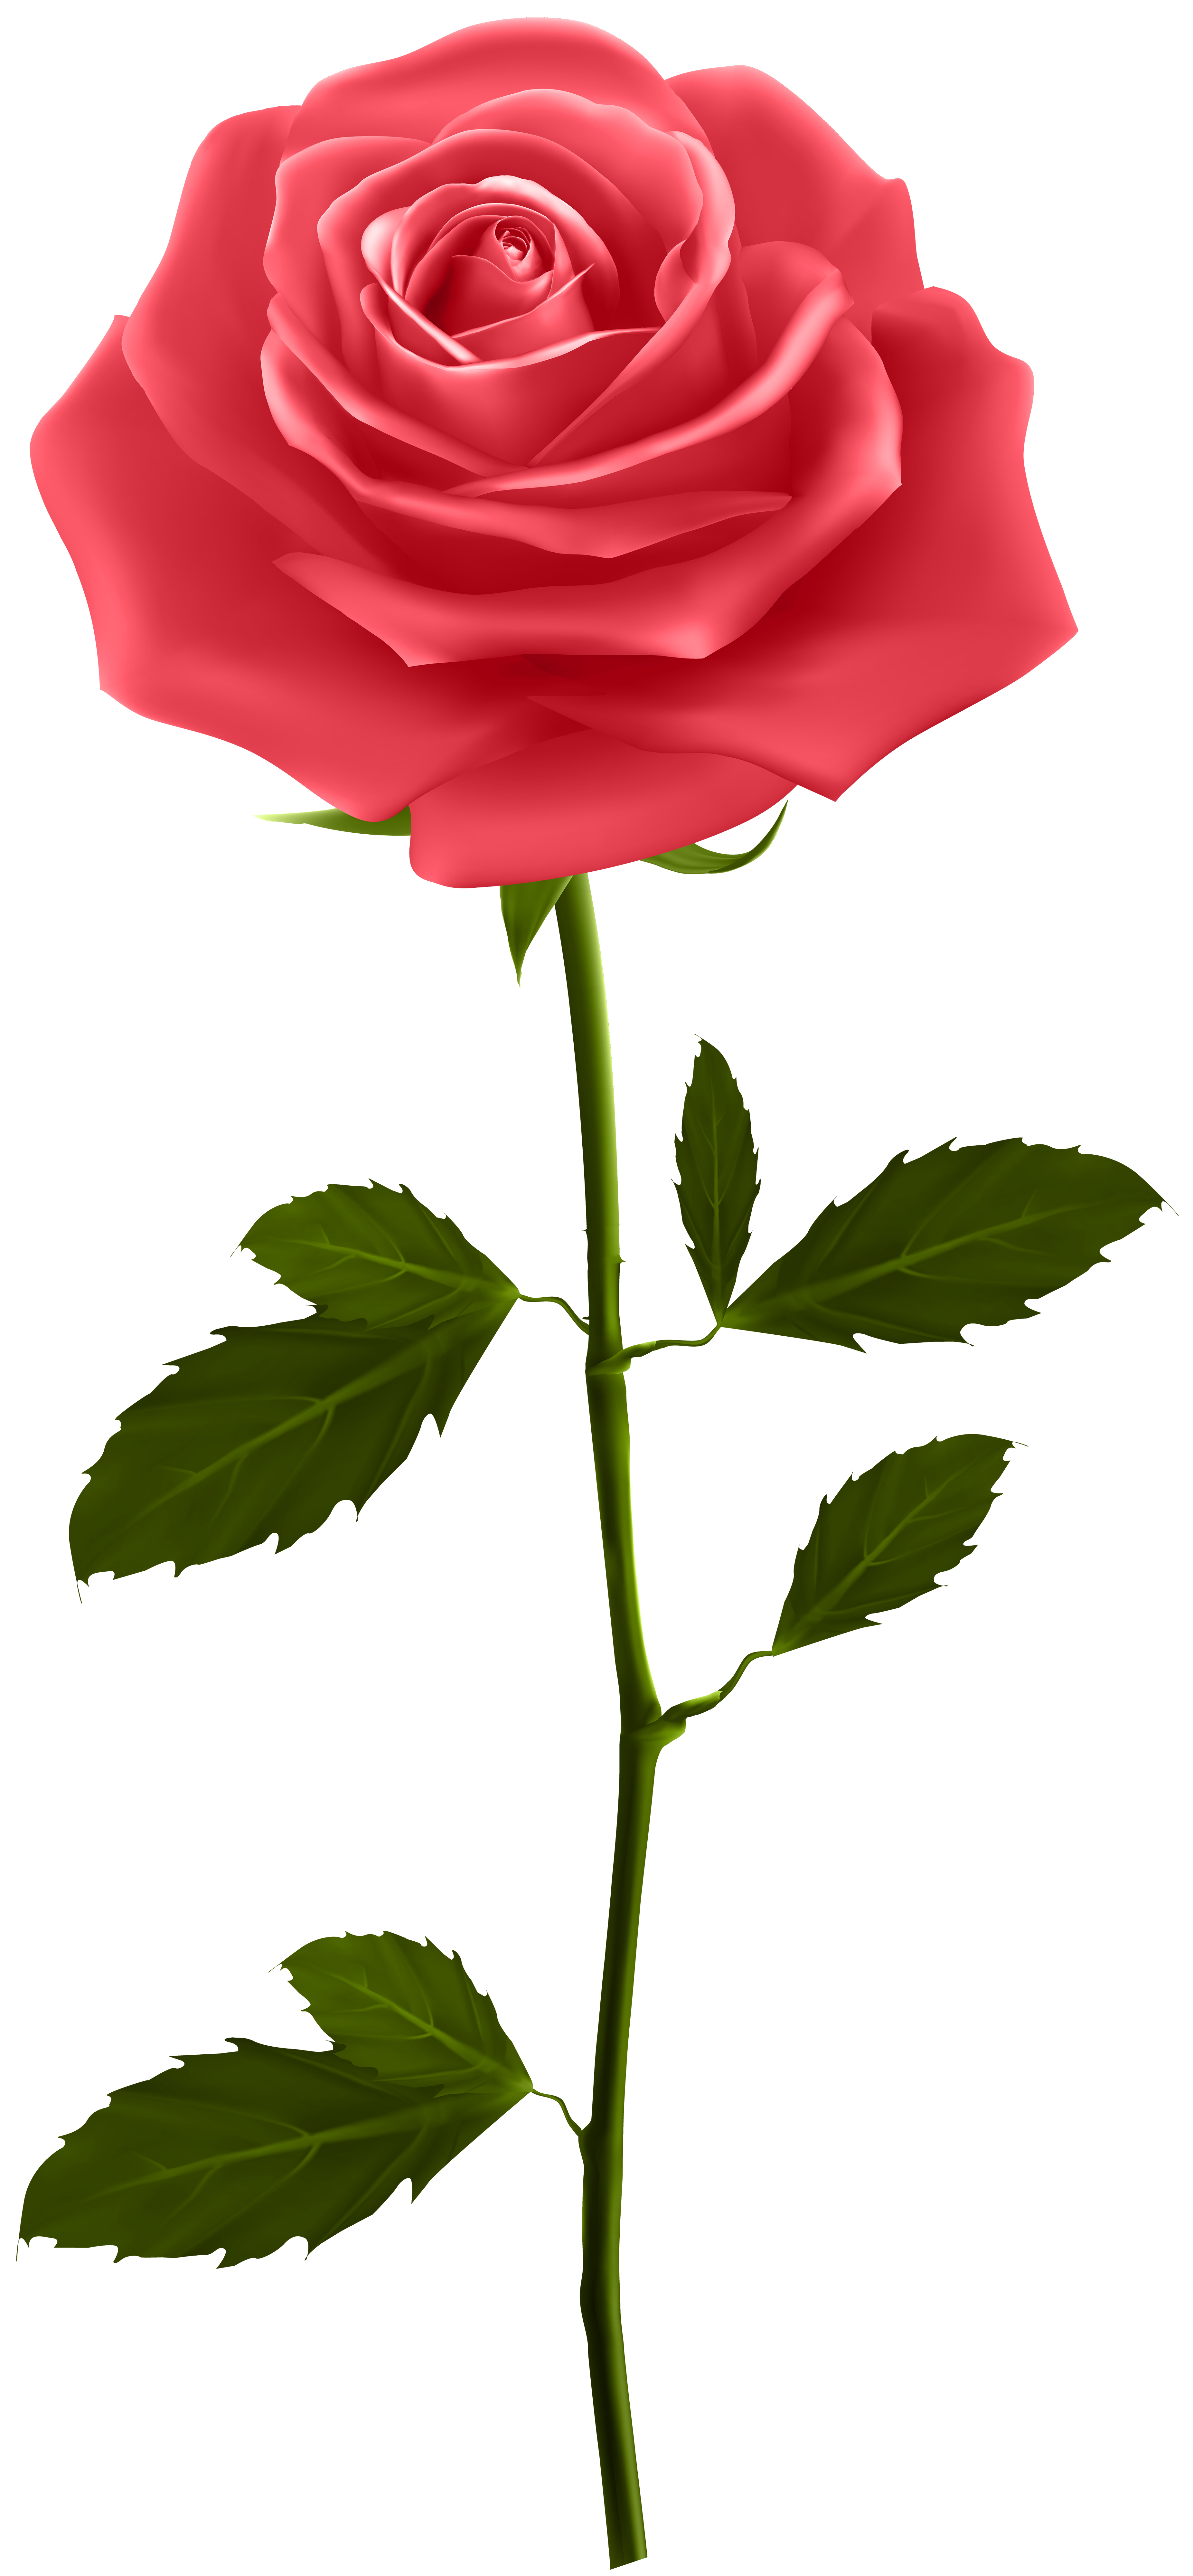 Kiss clipart mum. Red rose with stem